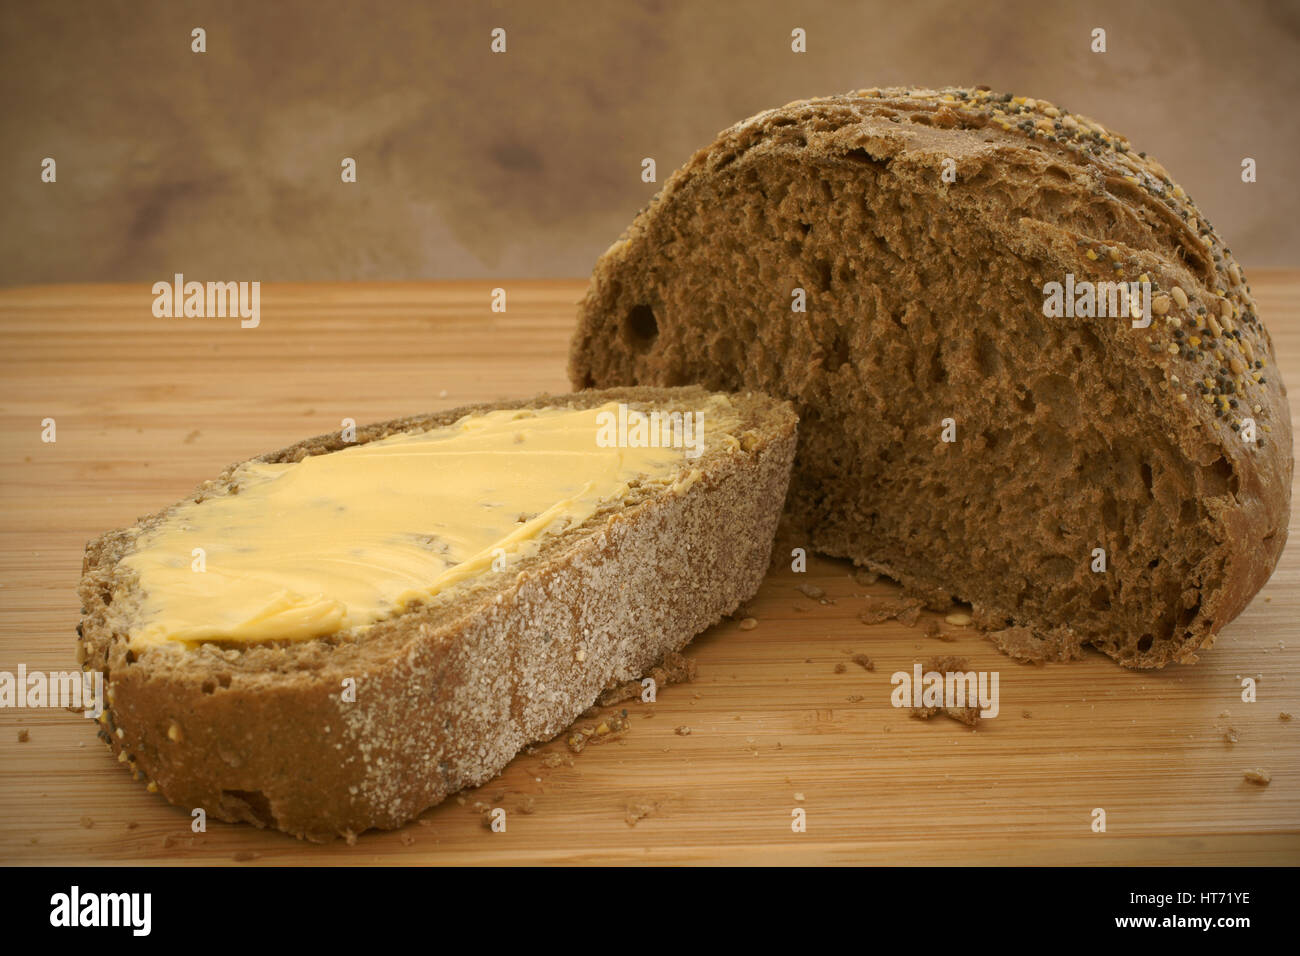 Buttered Rye bread in natural light Stock Photo